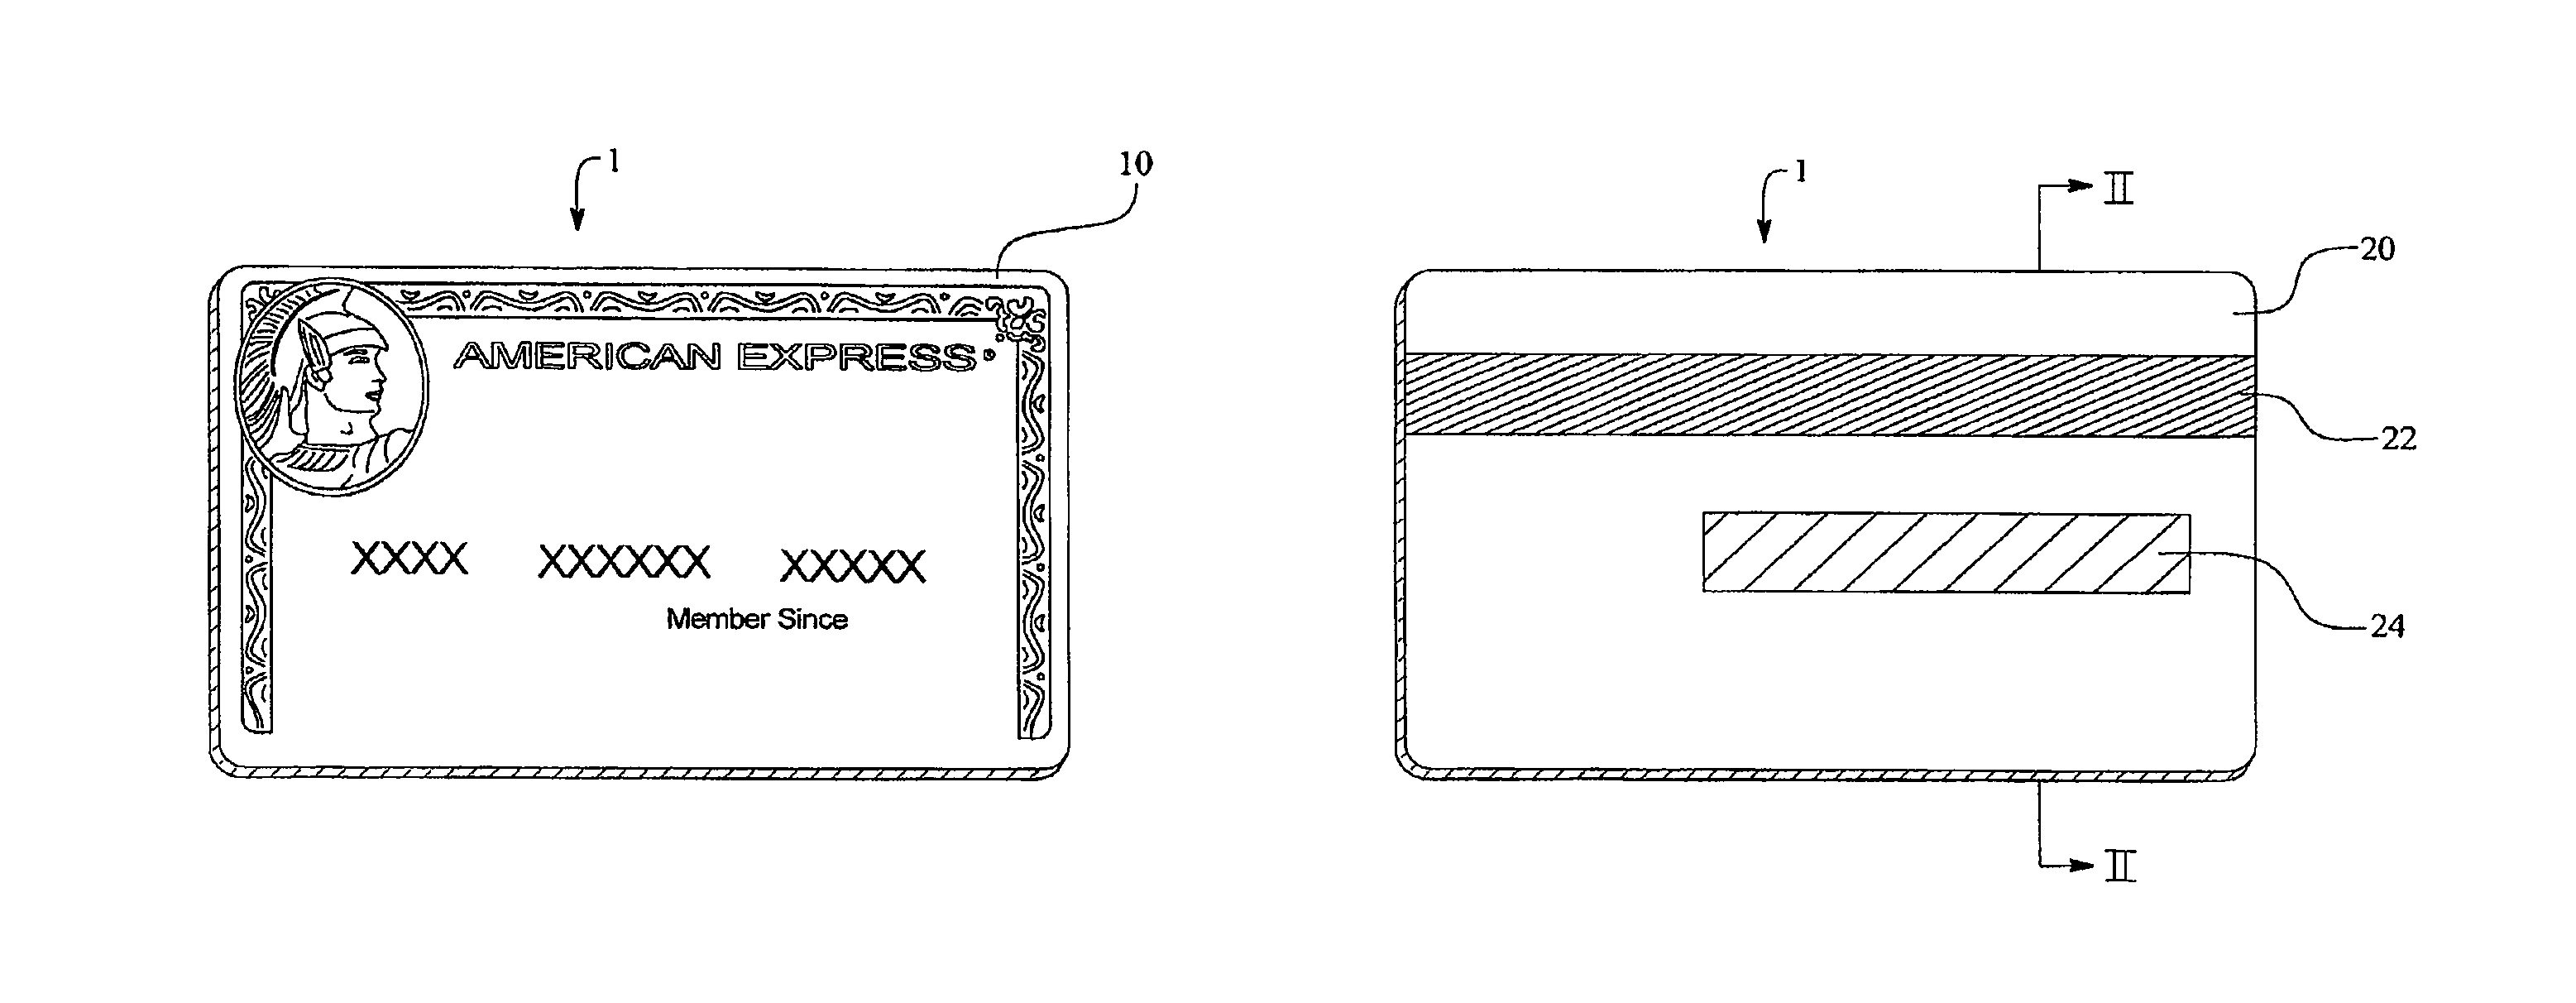 Metal-containing transaction card and method of making the same